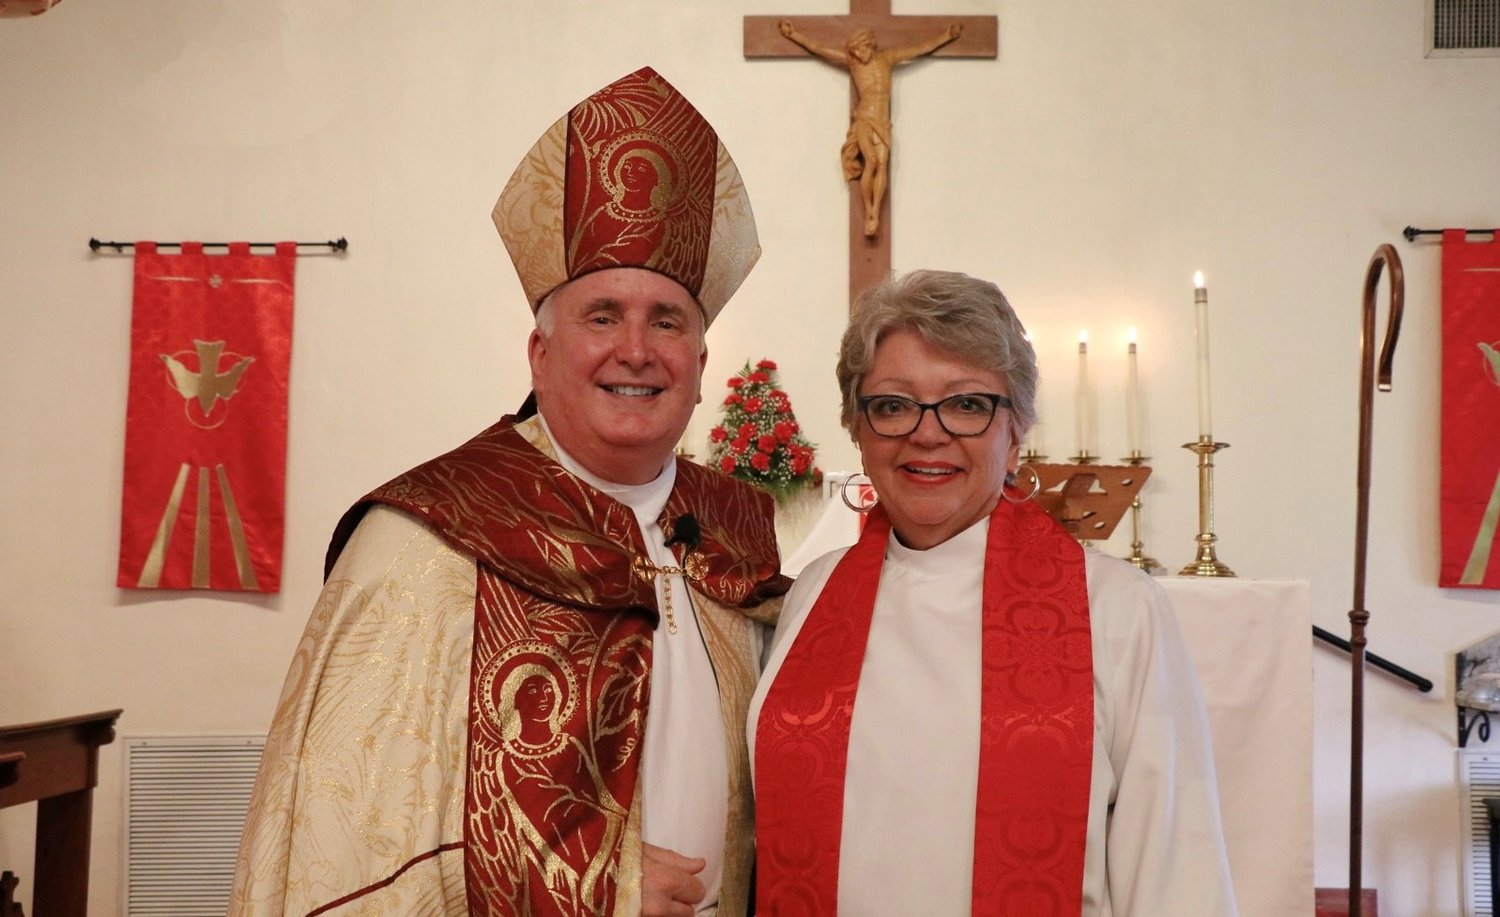 The Rt. Reverend Gregory O. Brewer, bishop of the diocese of Central Florida, ordained Reverend Kay Mueller on October 9, 2022.